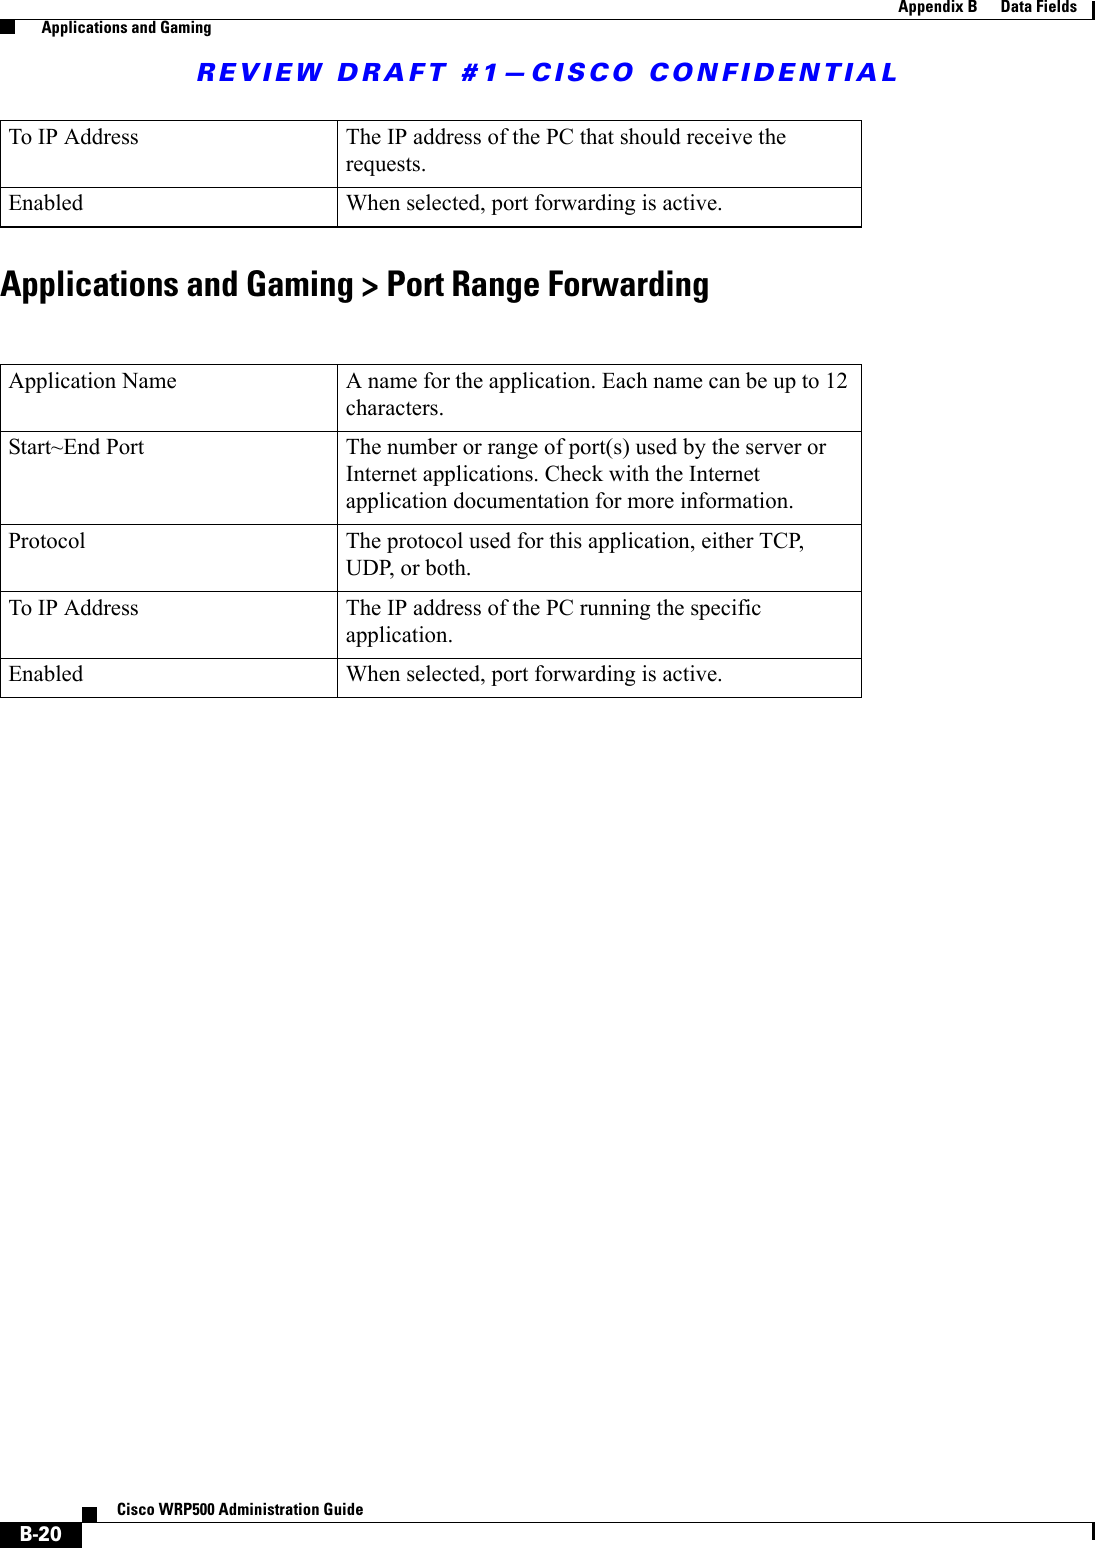 REVIEW DRAFT #1—CISCO CONFIDENTIALB-20Cisco WRP500 Administration Guide Appendix B      Data Fields  Applications and GamingApplications and Gaming &gt; Port Range ForwardingTo IP Address The IP address of the PC that should receive the requests. Enabled When selected, port forwarding is active.Application Name A name for the application. Each name can be up to 12 characters.Start~End Port The number or range of port(s) used by the server or Internet applications. Check with the Internet application documentation for more information.Protocol The protocol used for this application, either TCP, UDP, or both.To IP Address The IP address of the PC running the specific application. Enabled When selected, port forwarding is active.